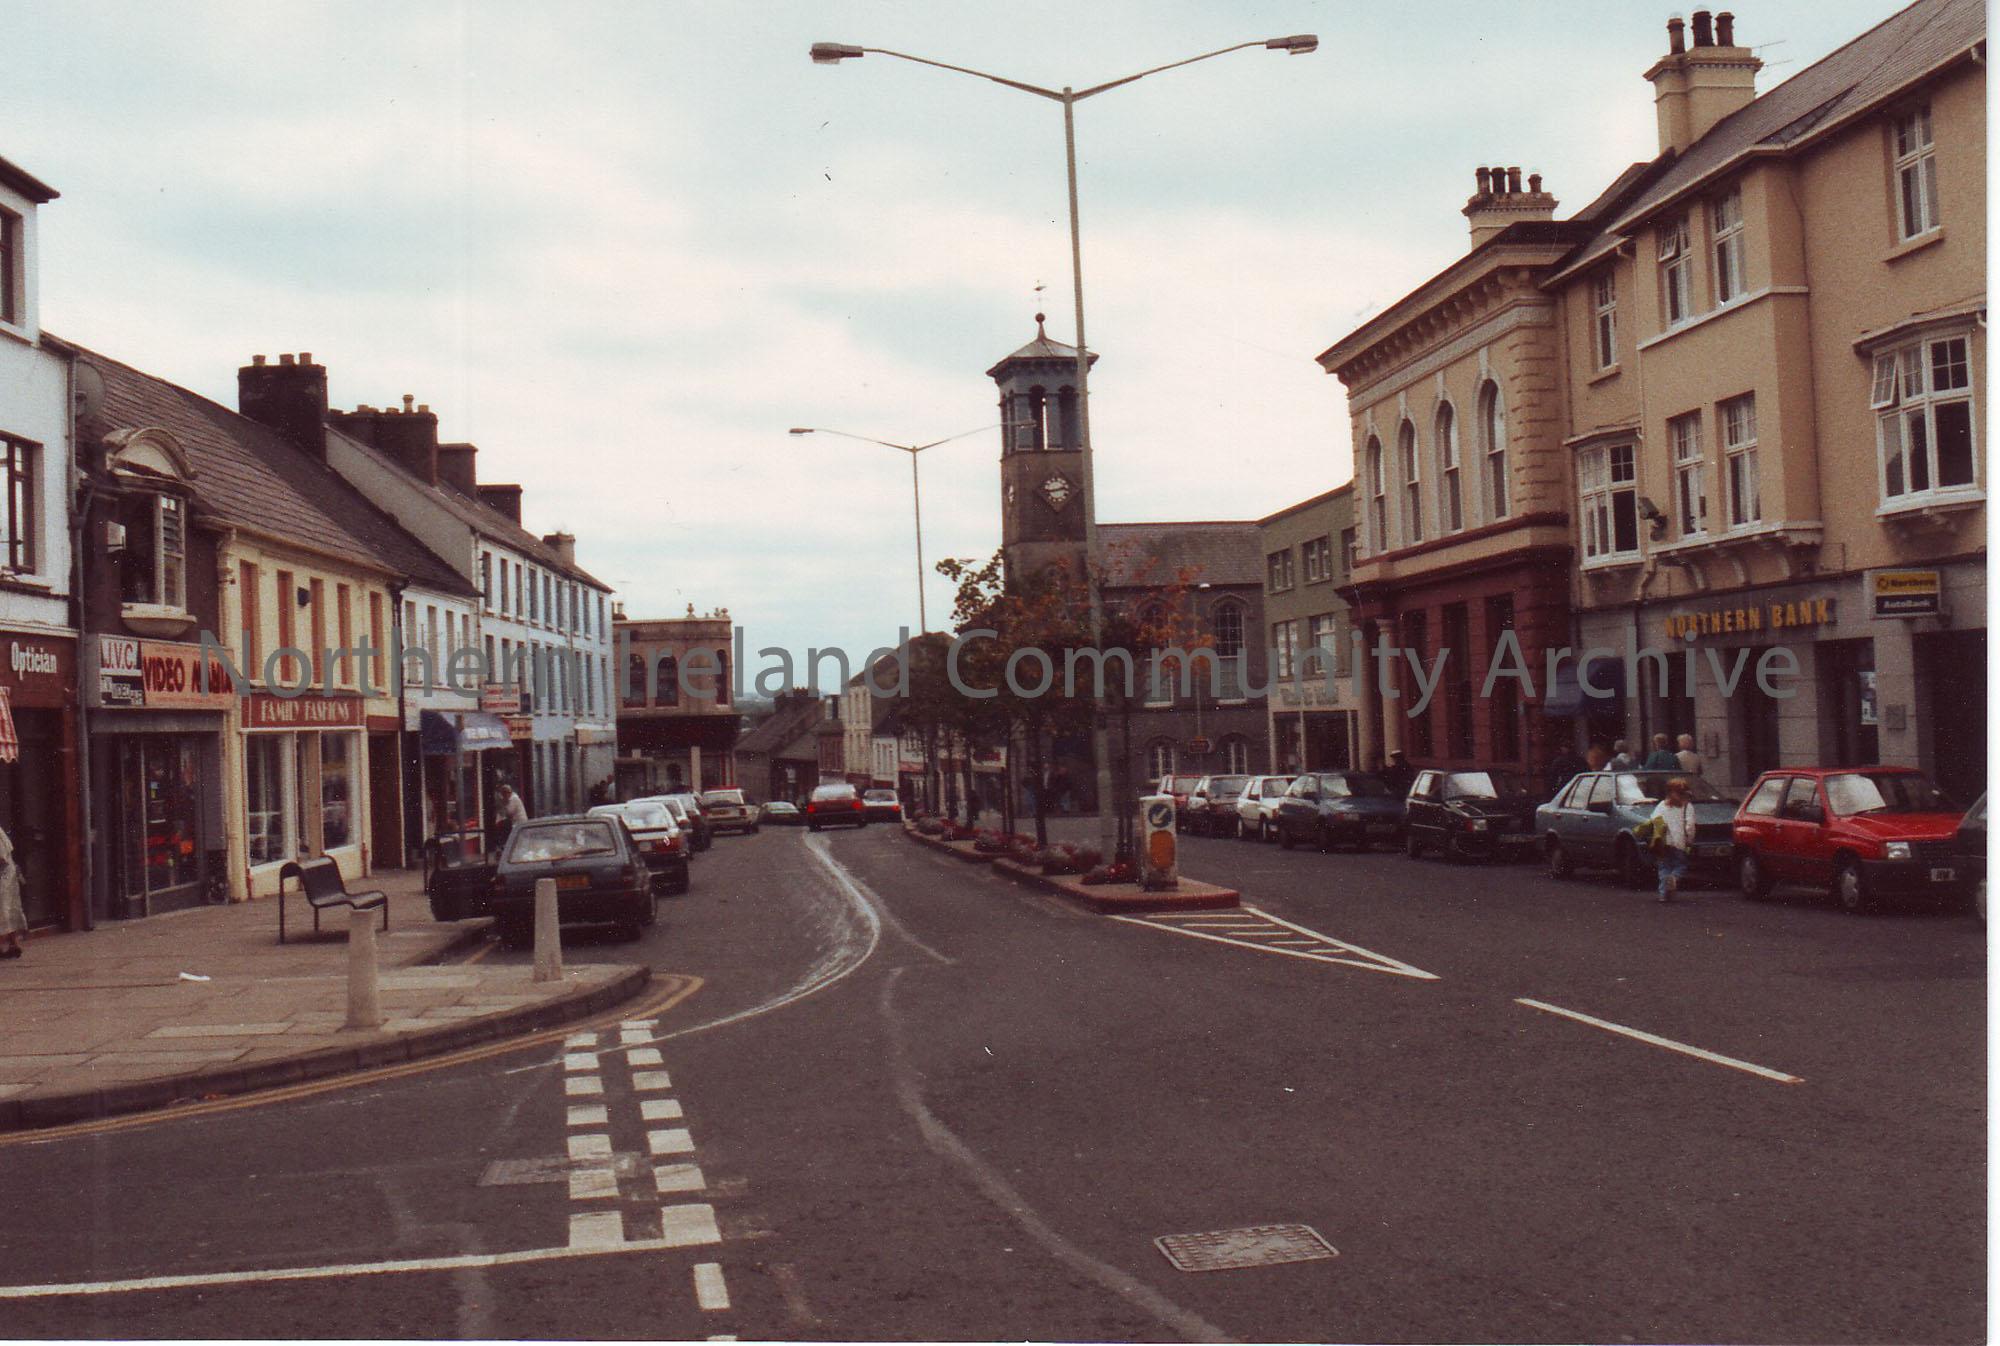 colour photograph, c 1990s. View down High Street. Buildings visible include: Wilson Mc Michael’s, Nothern Bank